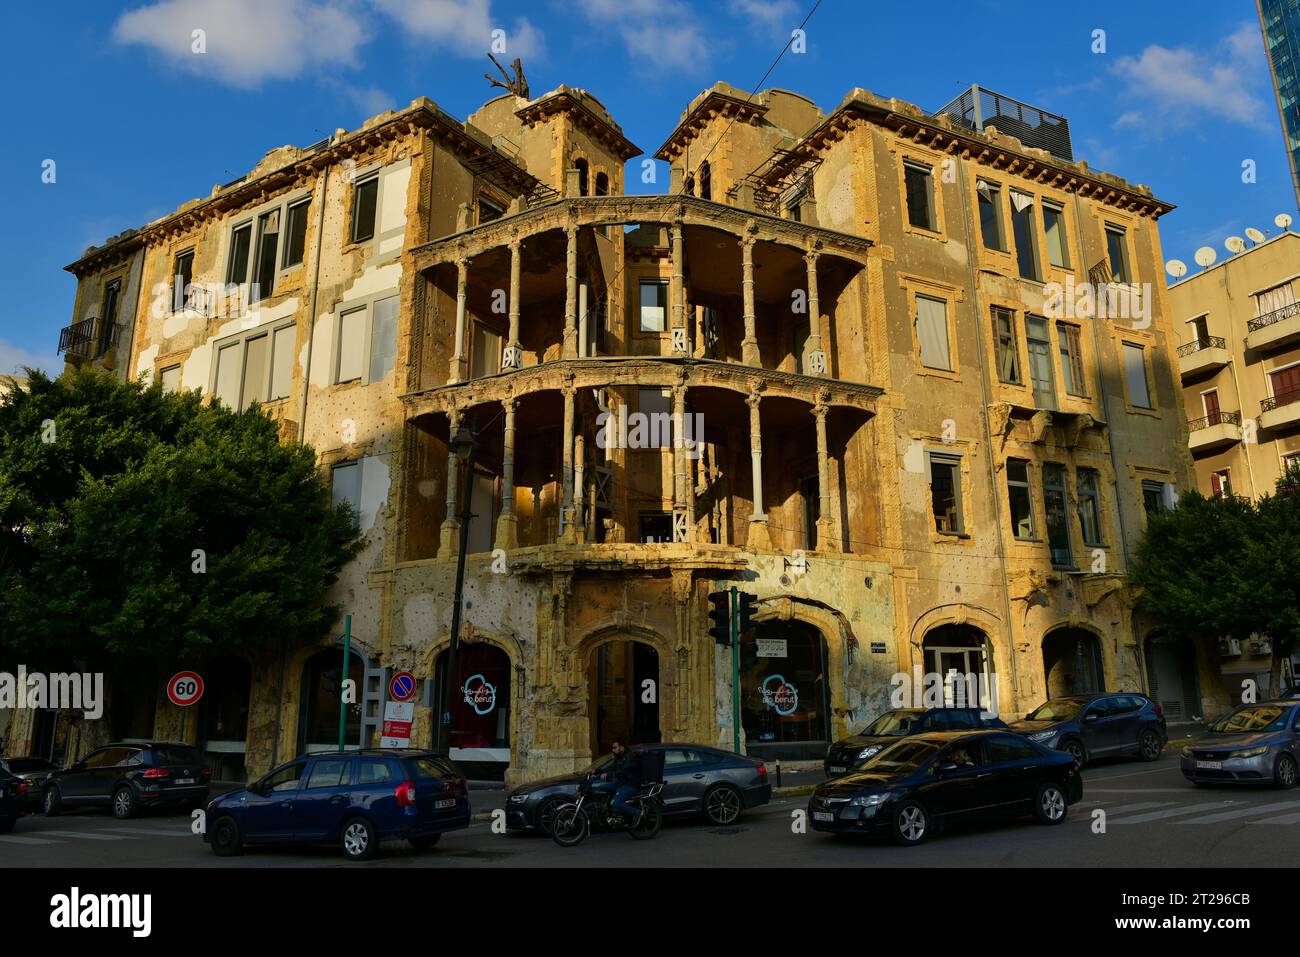 Beit Beirut. Built 1920s, an apartment block that housed 8 middle class families until the civil war, when it became a vantage point for snipers Stock Photo